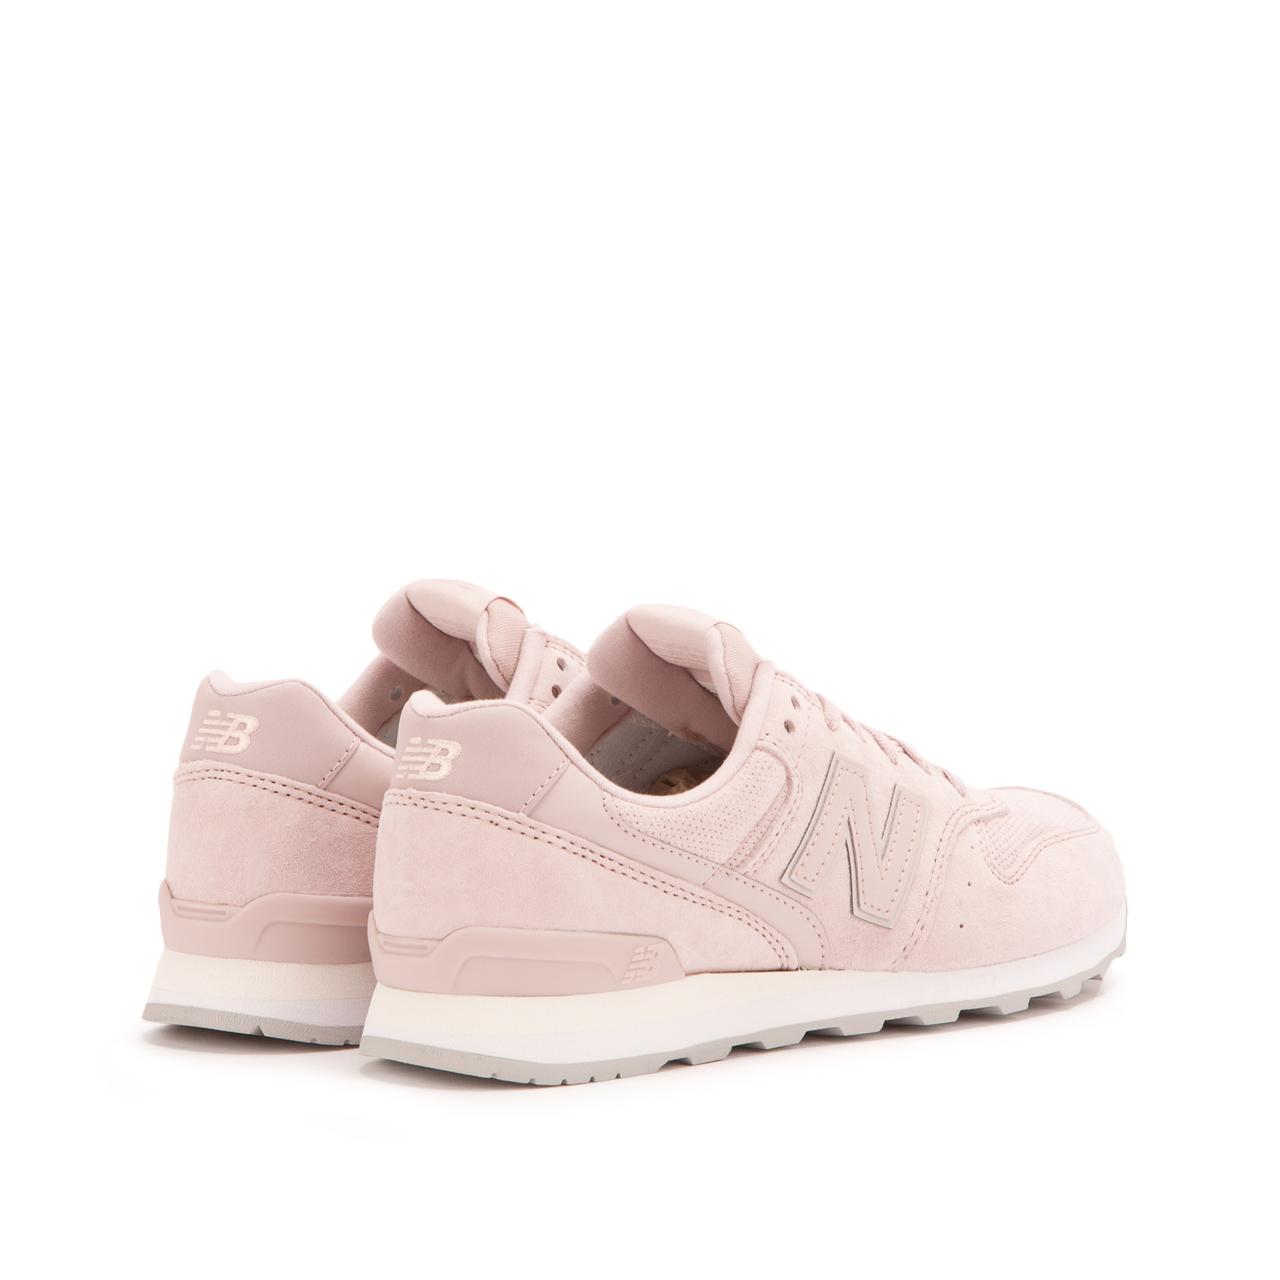 New Balance Suede Wr 996 Wpp in Pink - Lyst